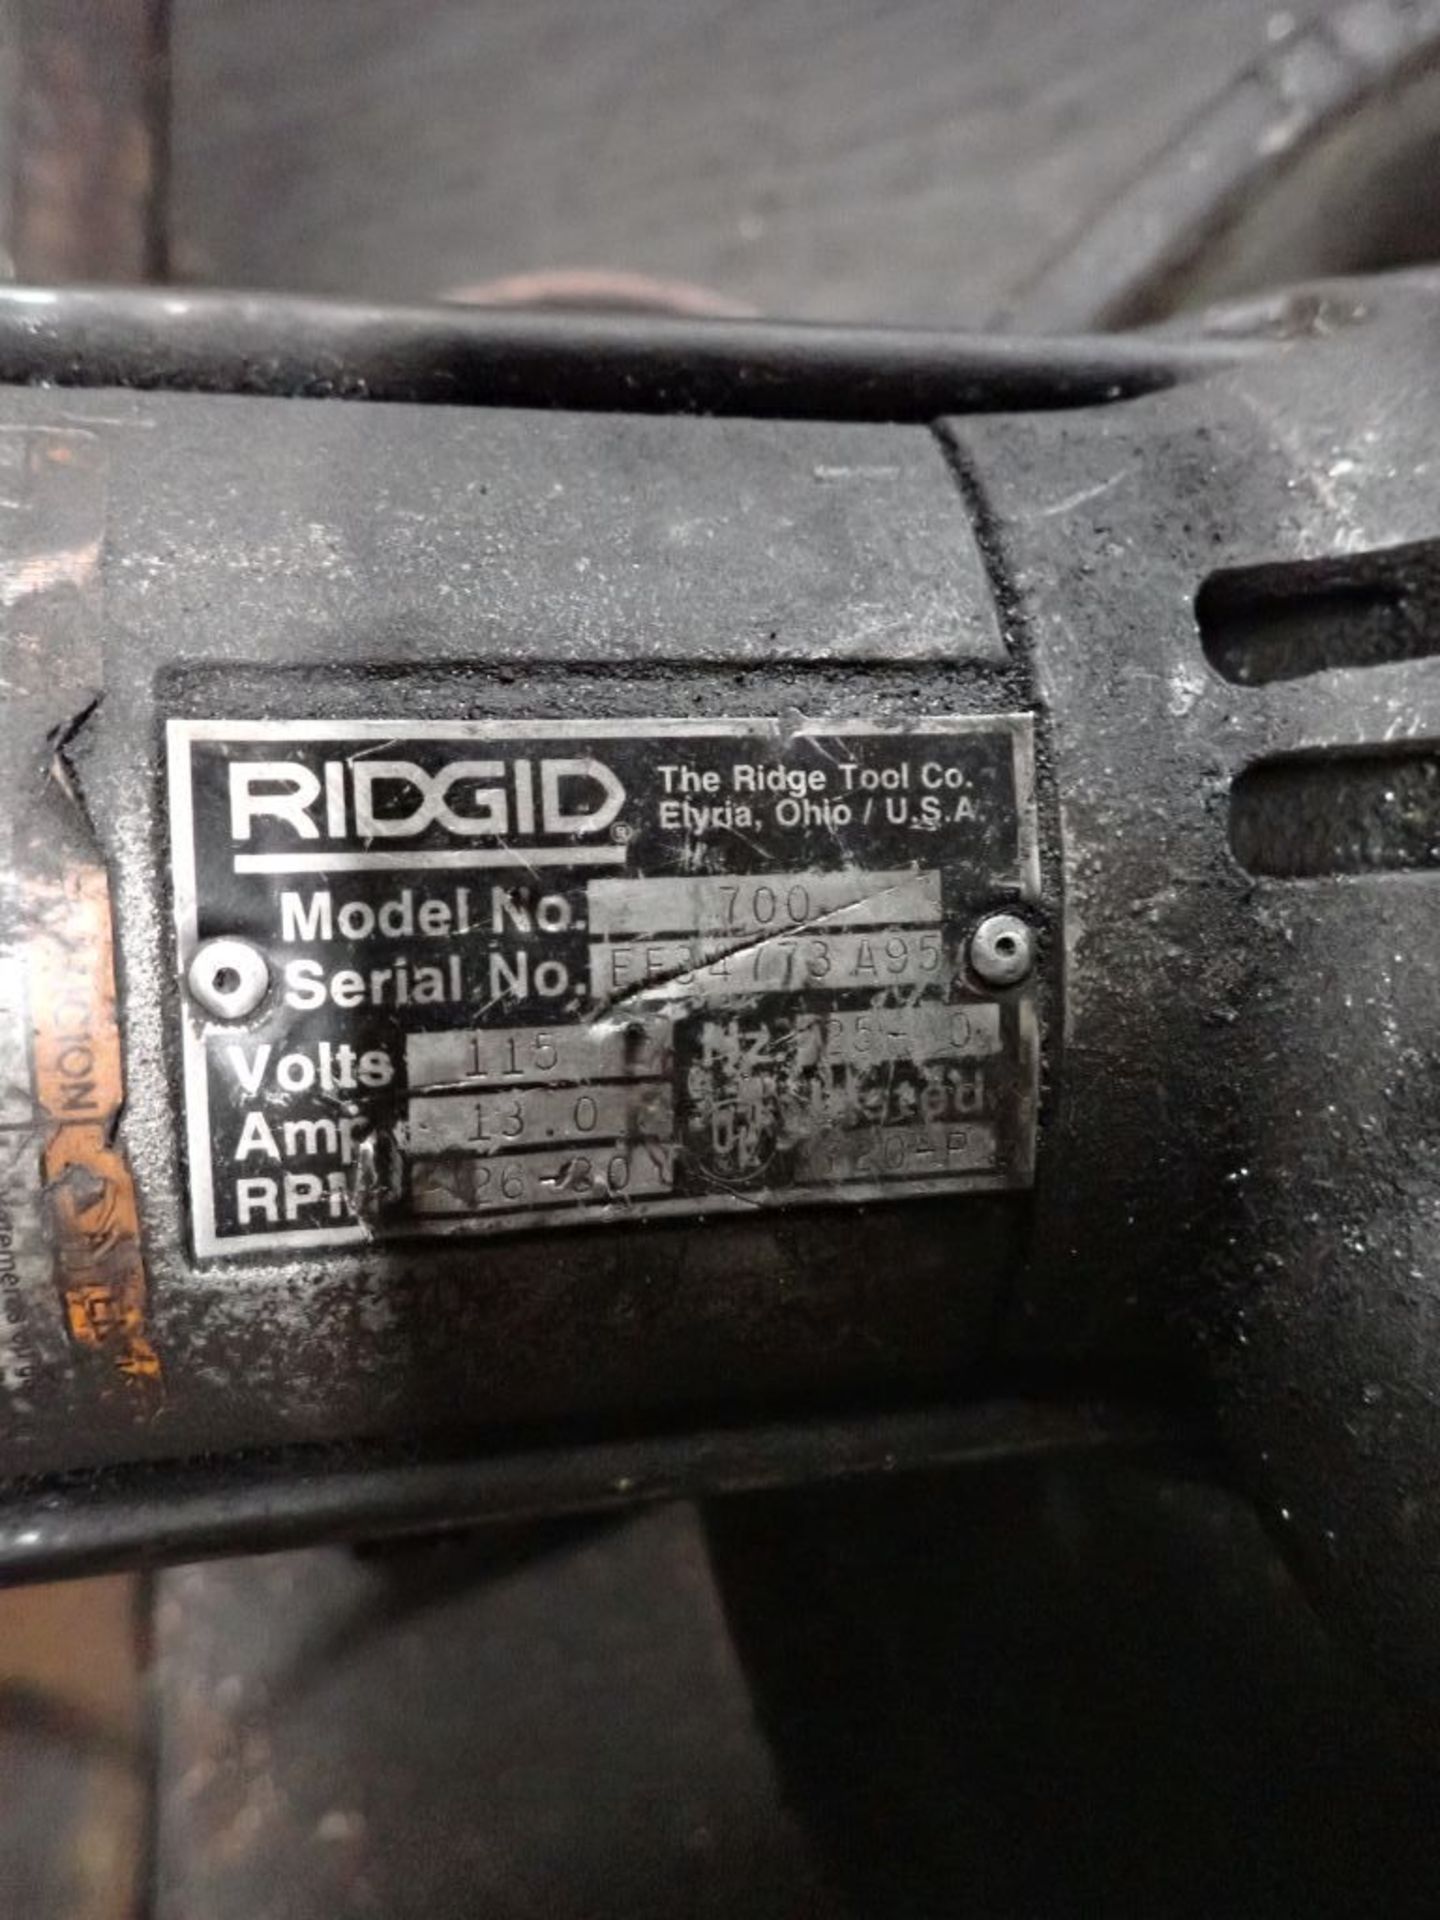 Ridgid 700 Power Threader w/Tristand and Dies - Image 5 of 6